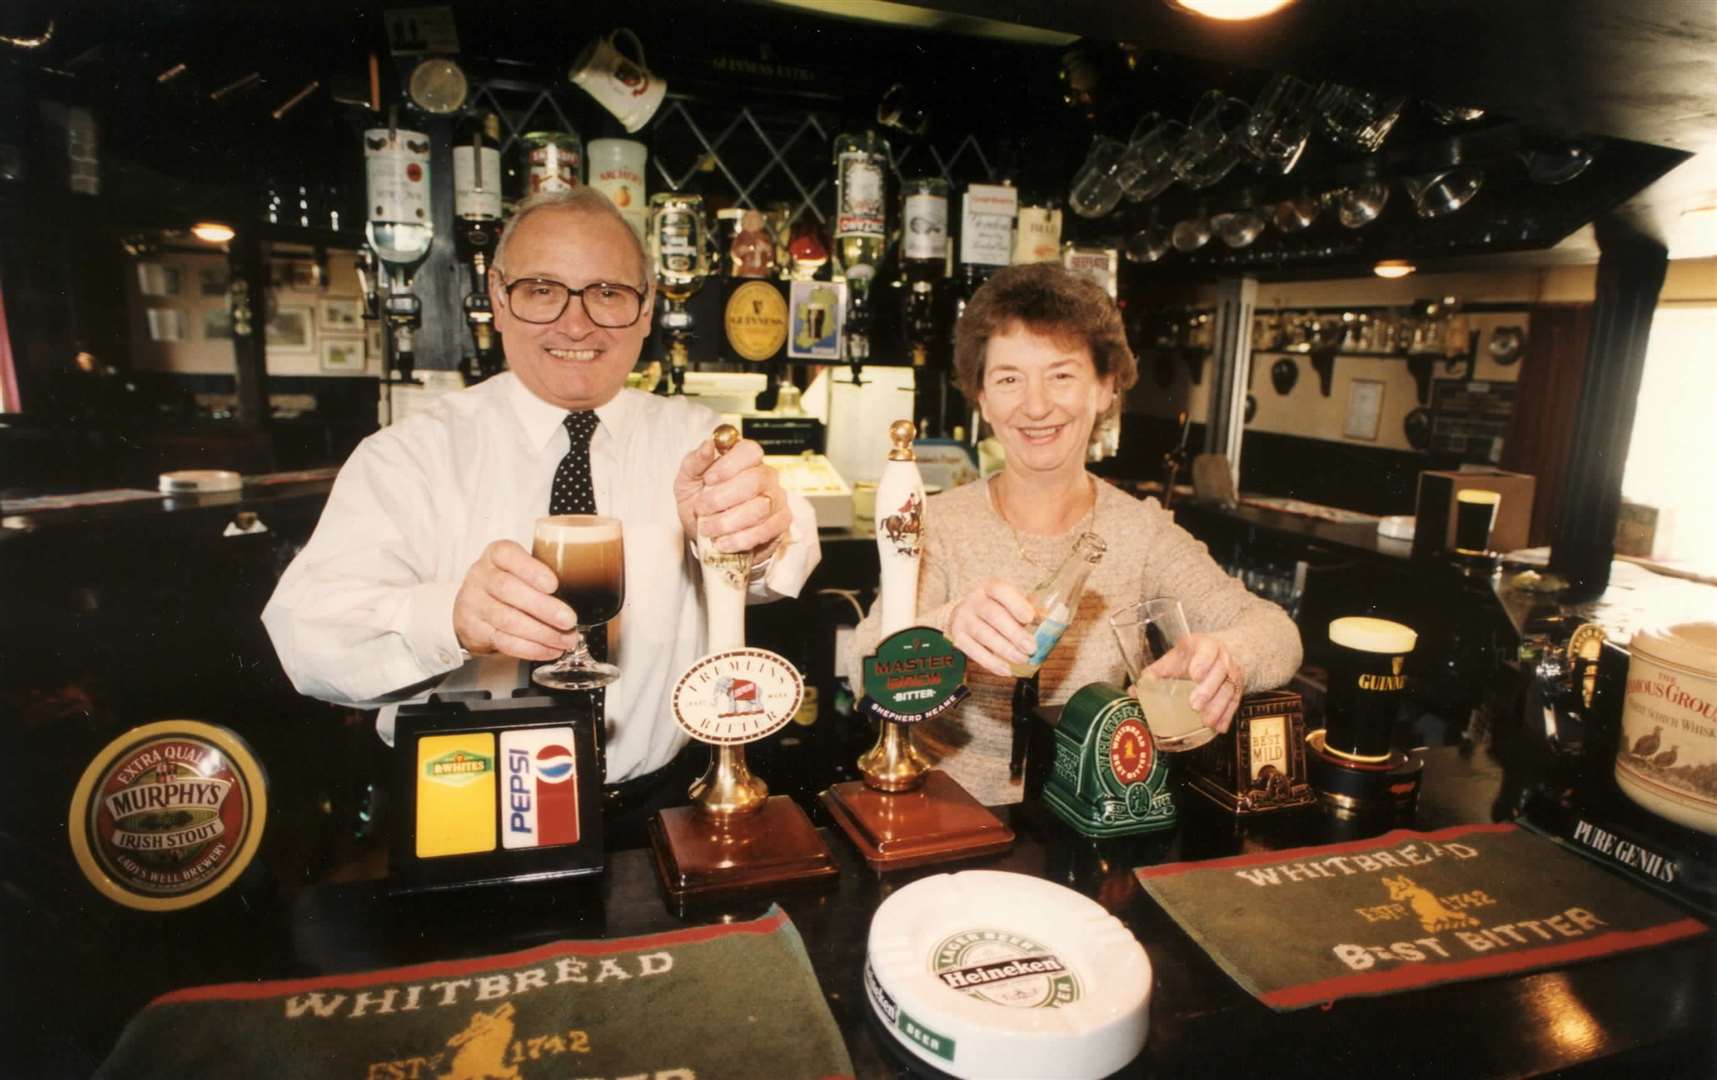 The landlord and his wife at the Kings Head pub in Grafty Green, near Maidstone, in 1996